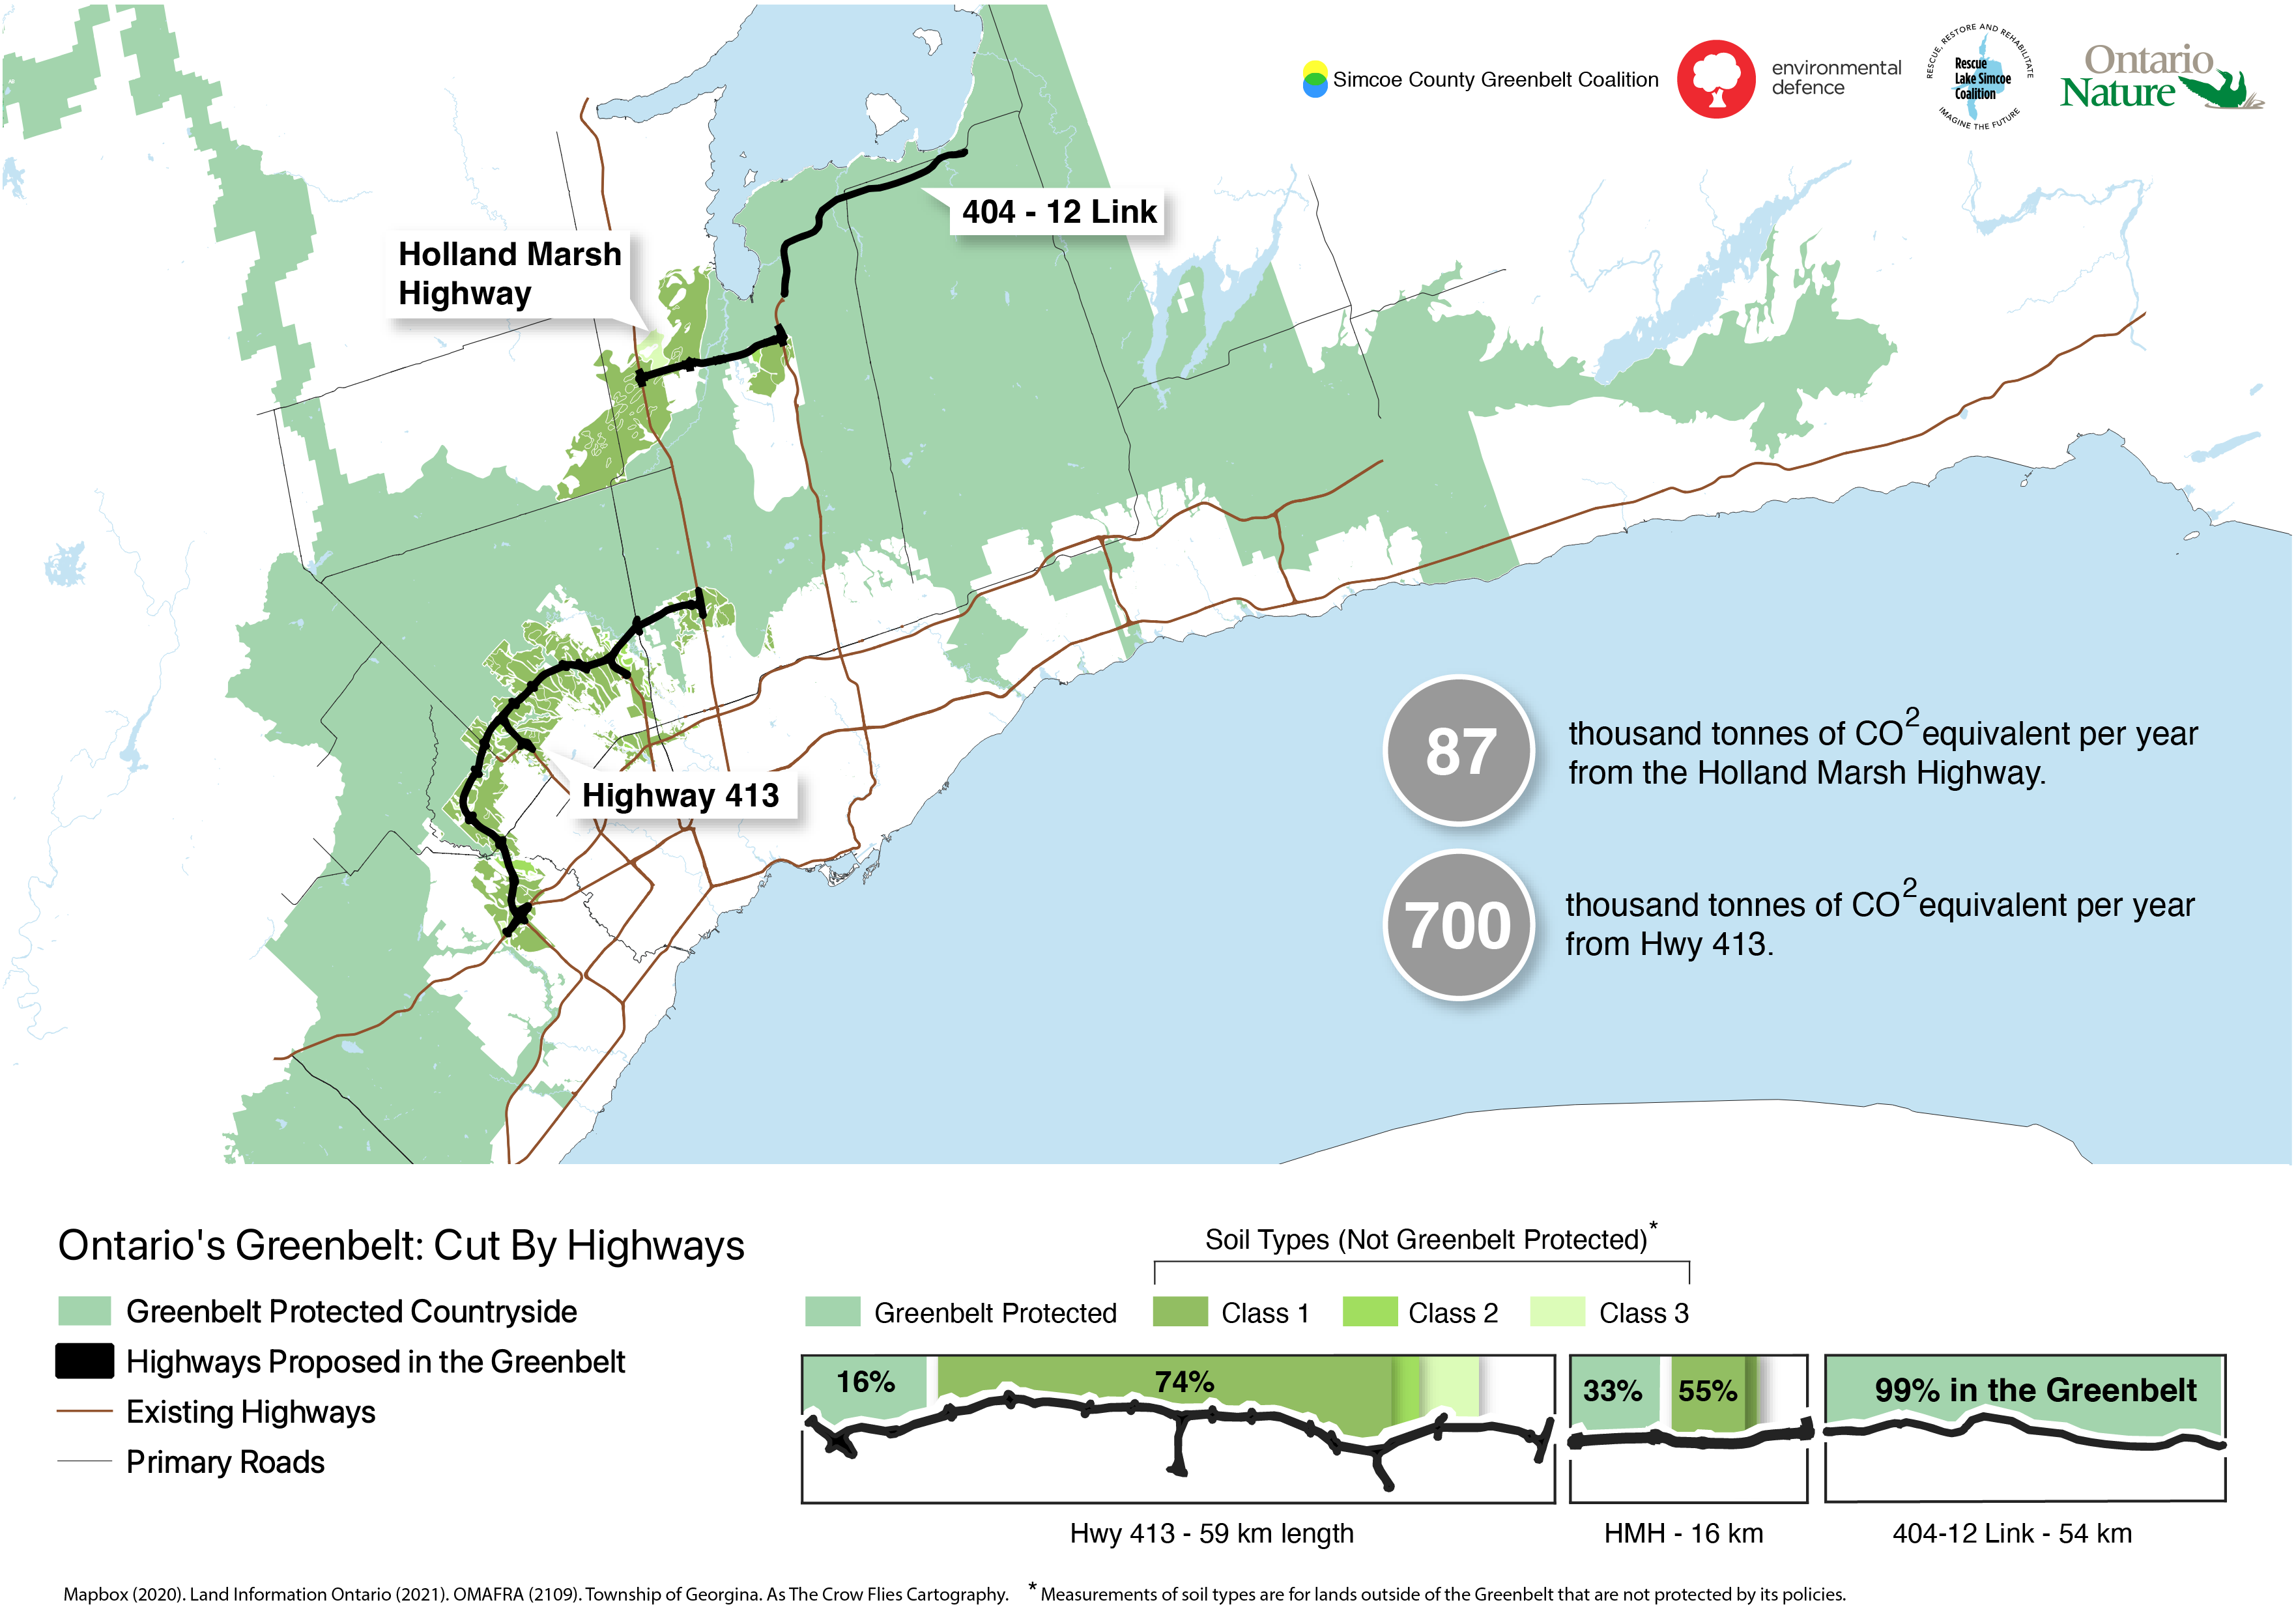 Map showing locations of highways that the Ford government plans to build, and the impact they would have on the Greenbelt and on farmland. Credit Simcoe County Greenbelt Coalition.